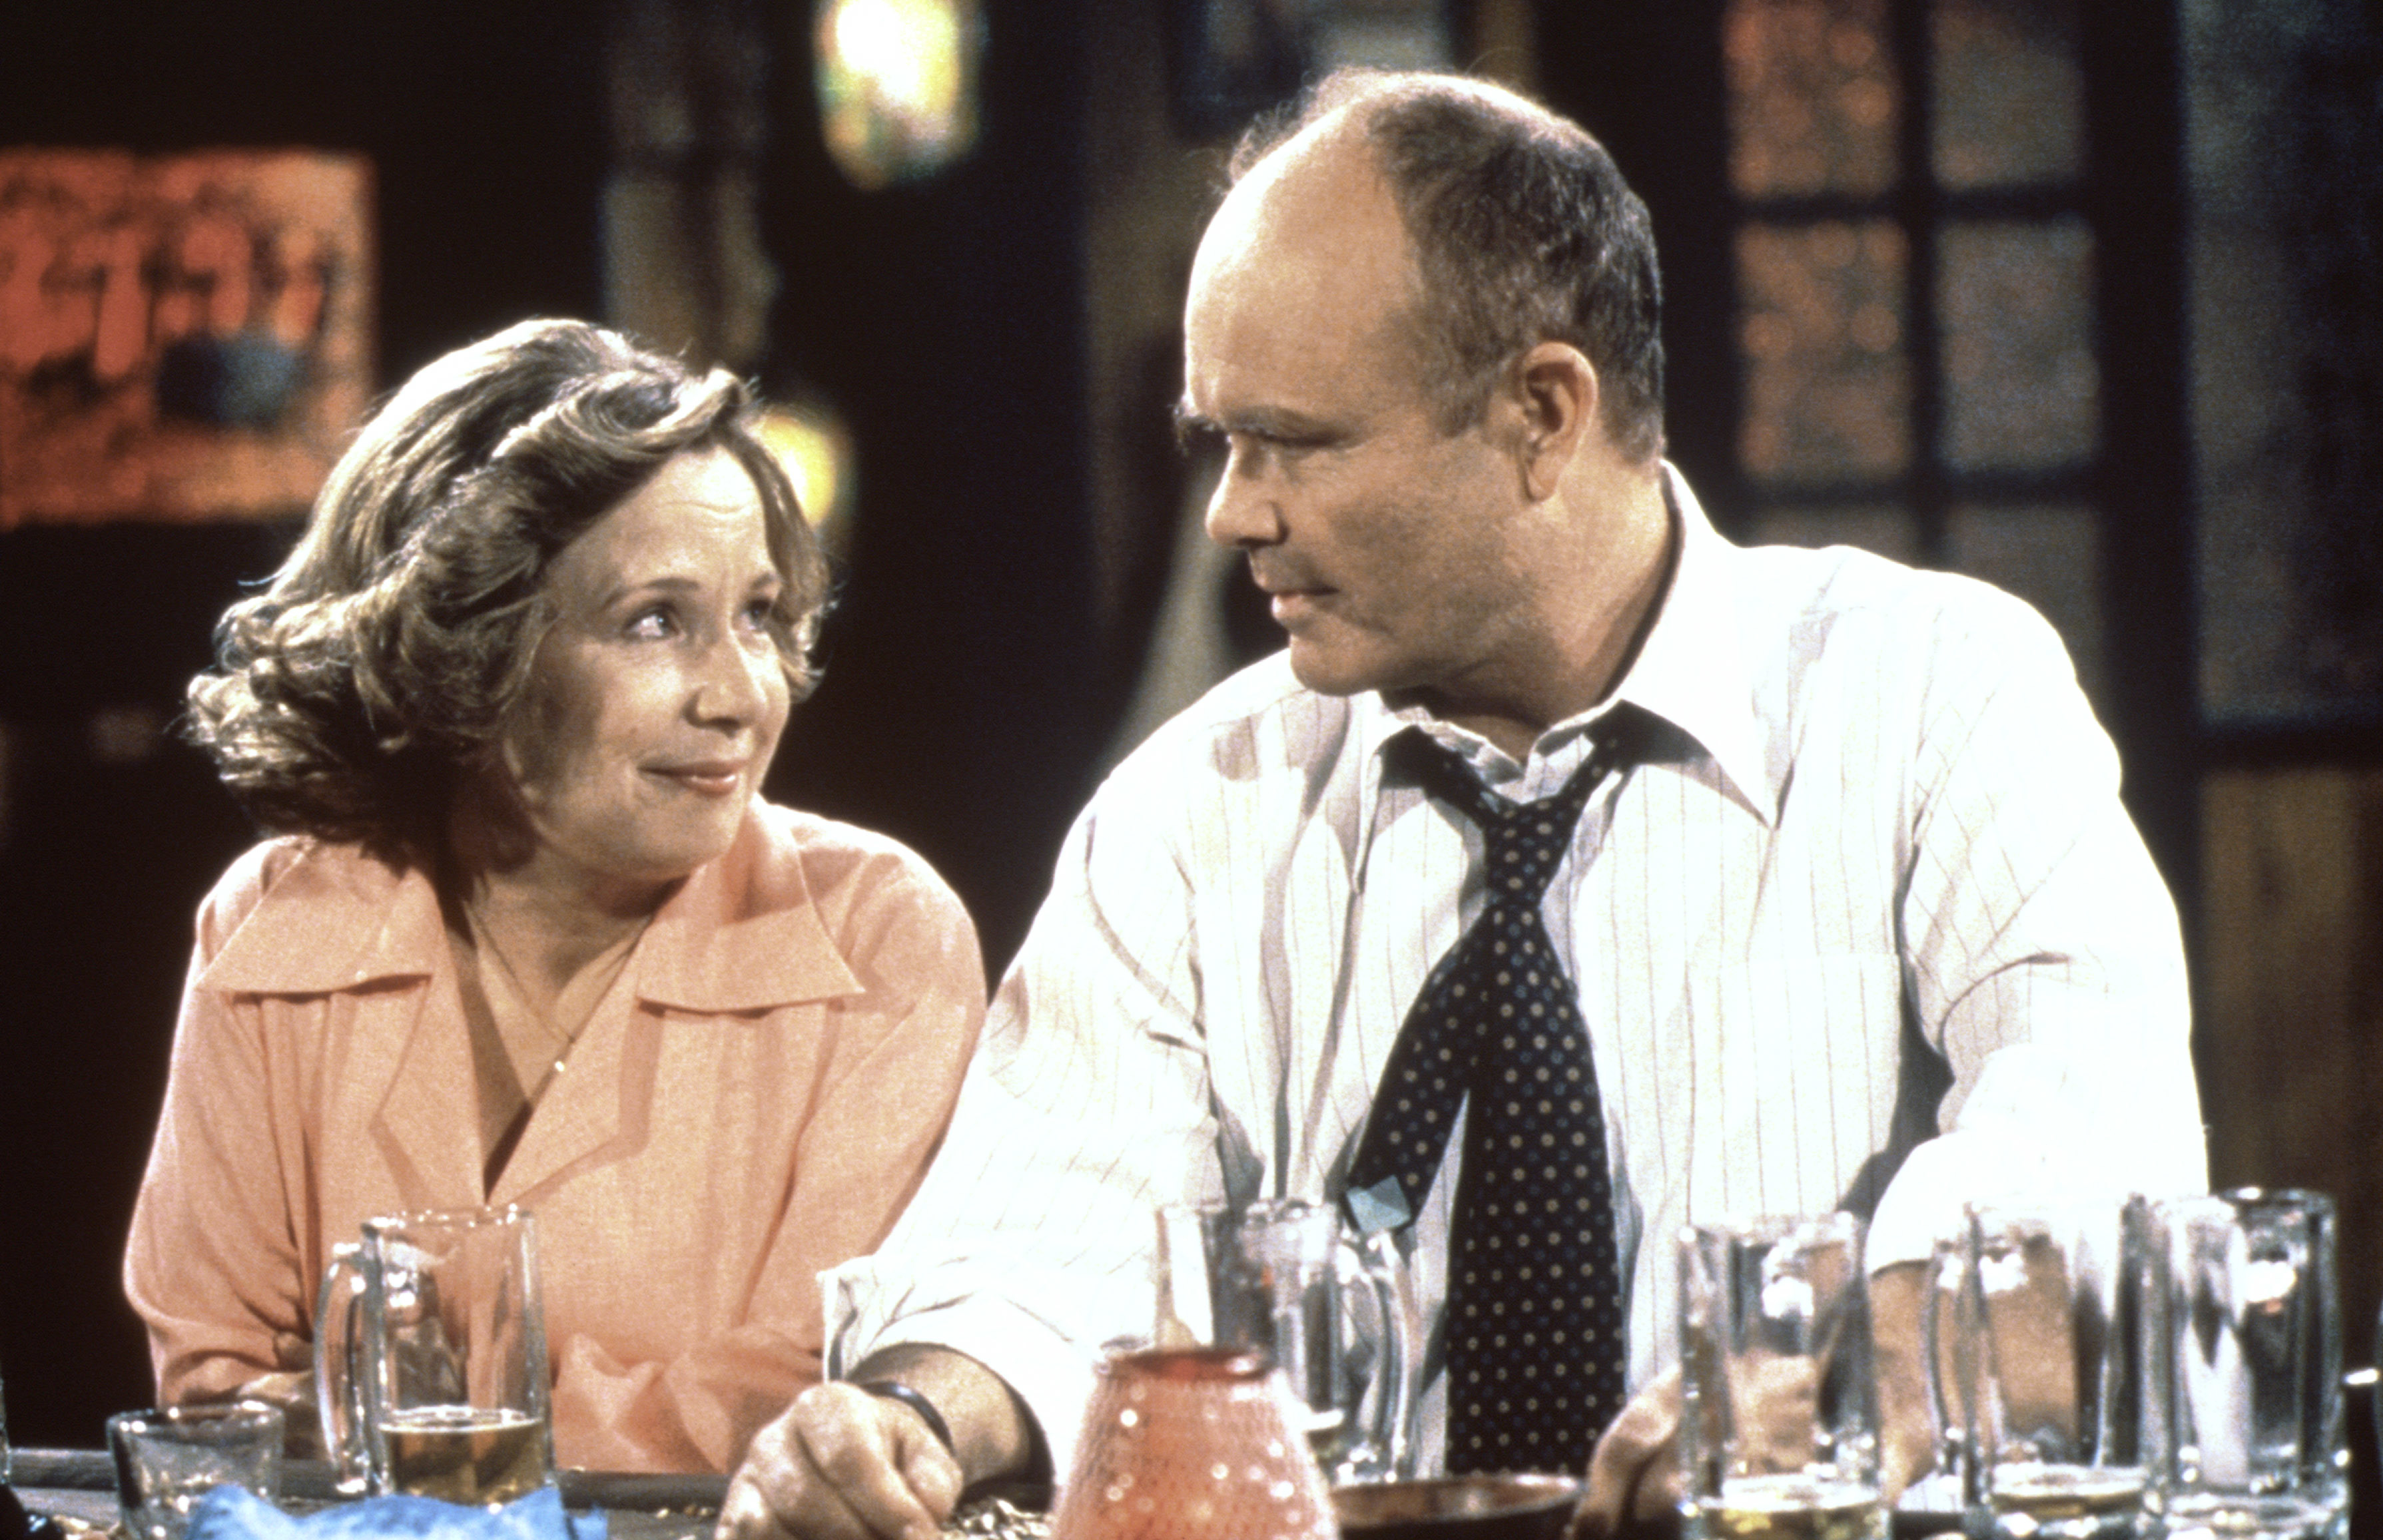 Two actors on set, sitting at a table with glasses, portraying characters in a conversation